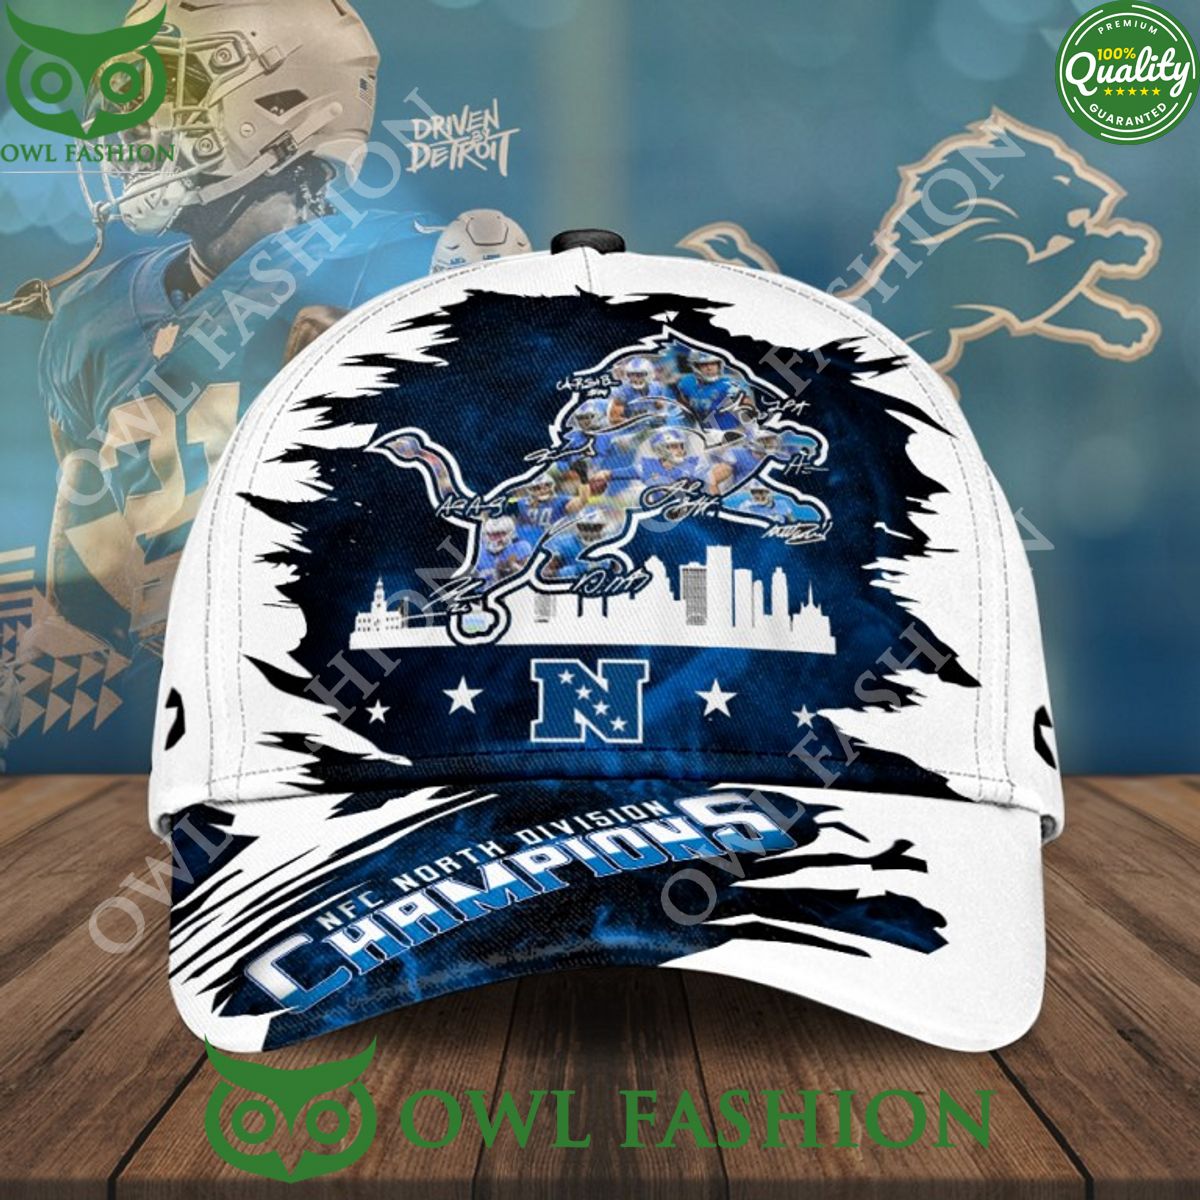 driven by detroit lions nfc north division champions pro bowlers classic printed cap 1 mgveR.jpg